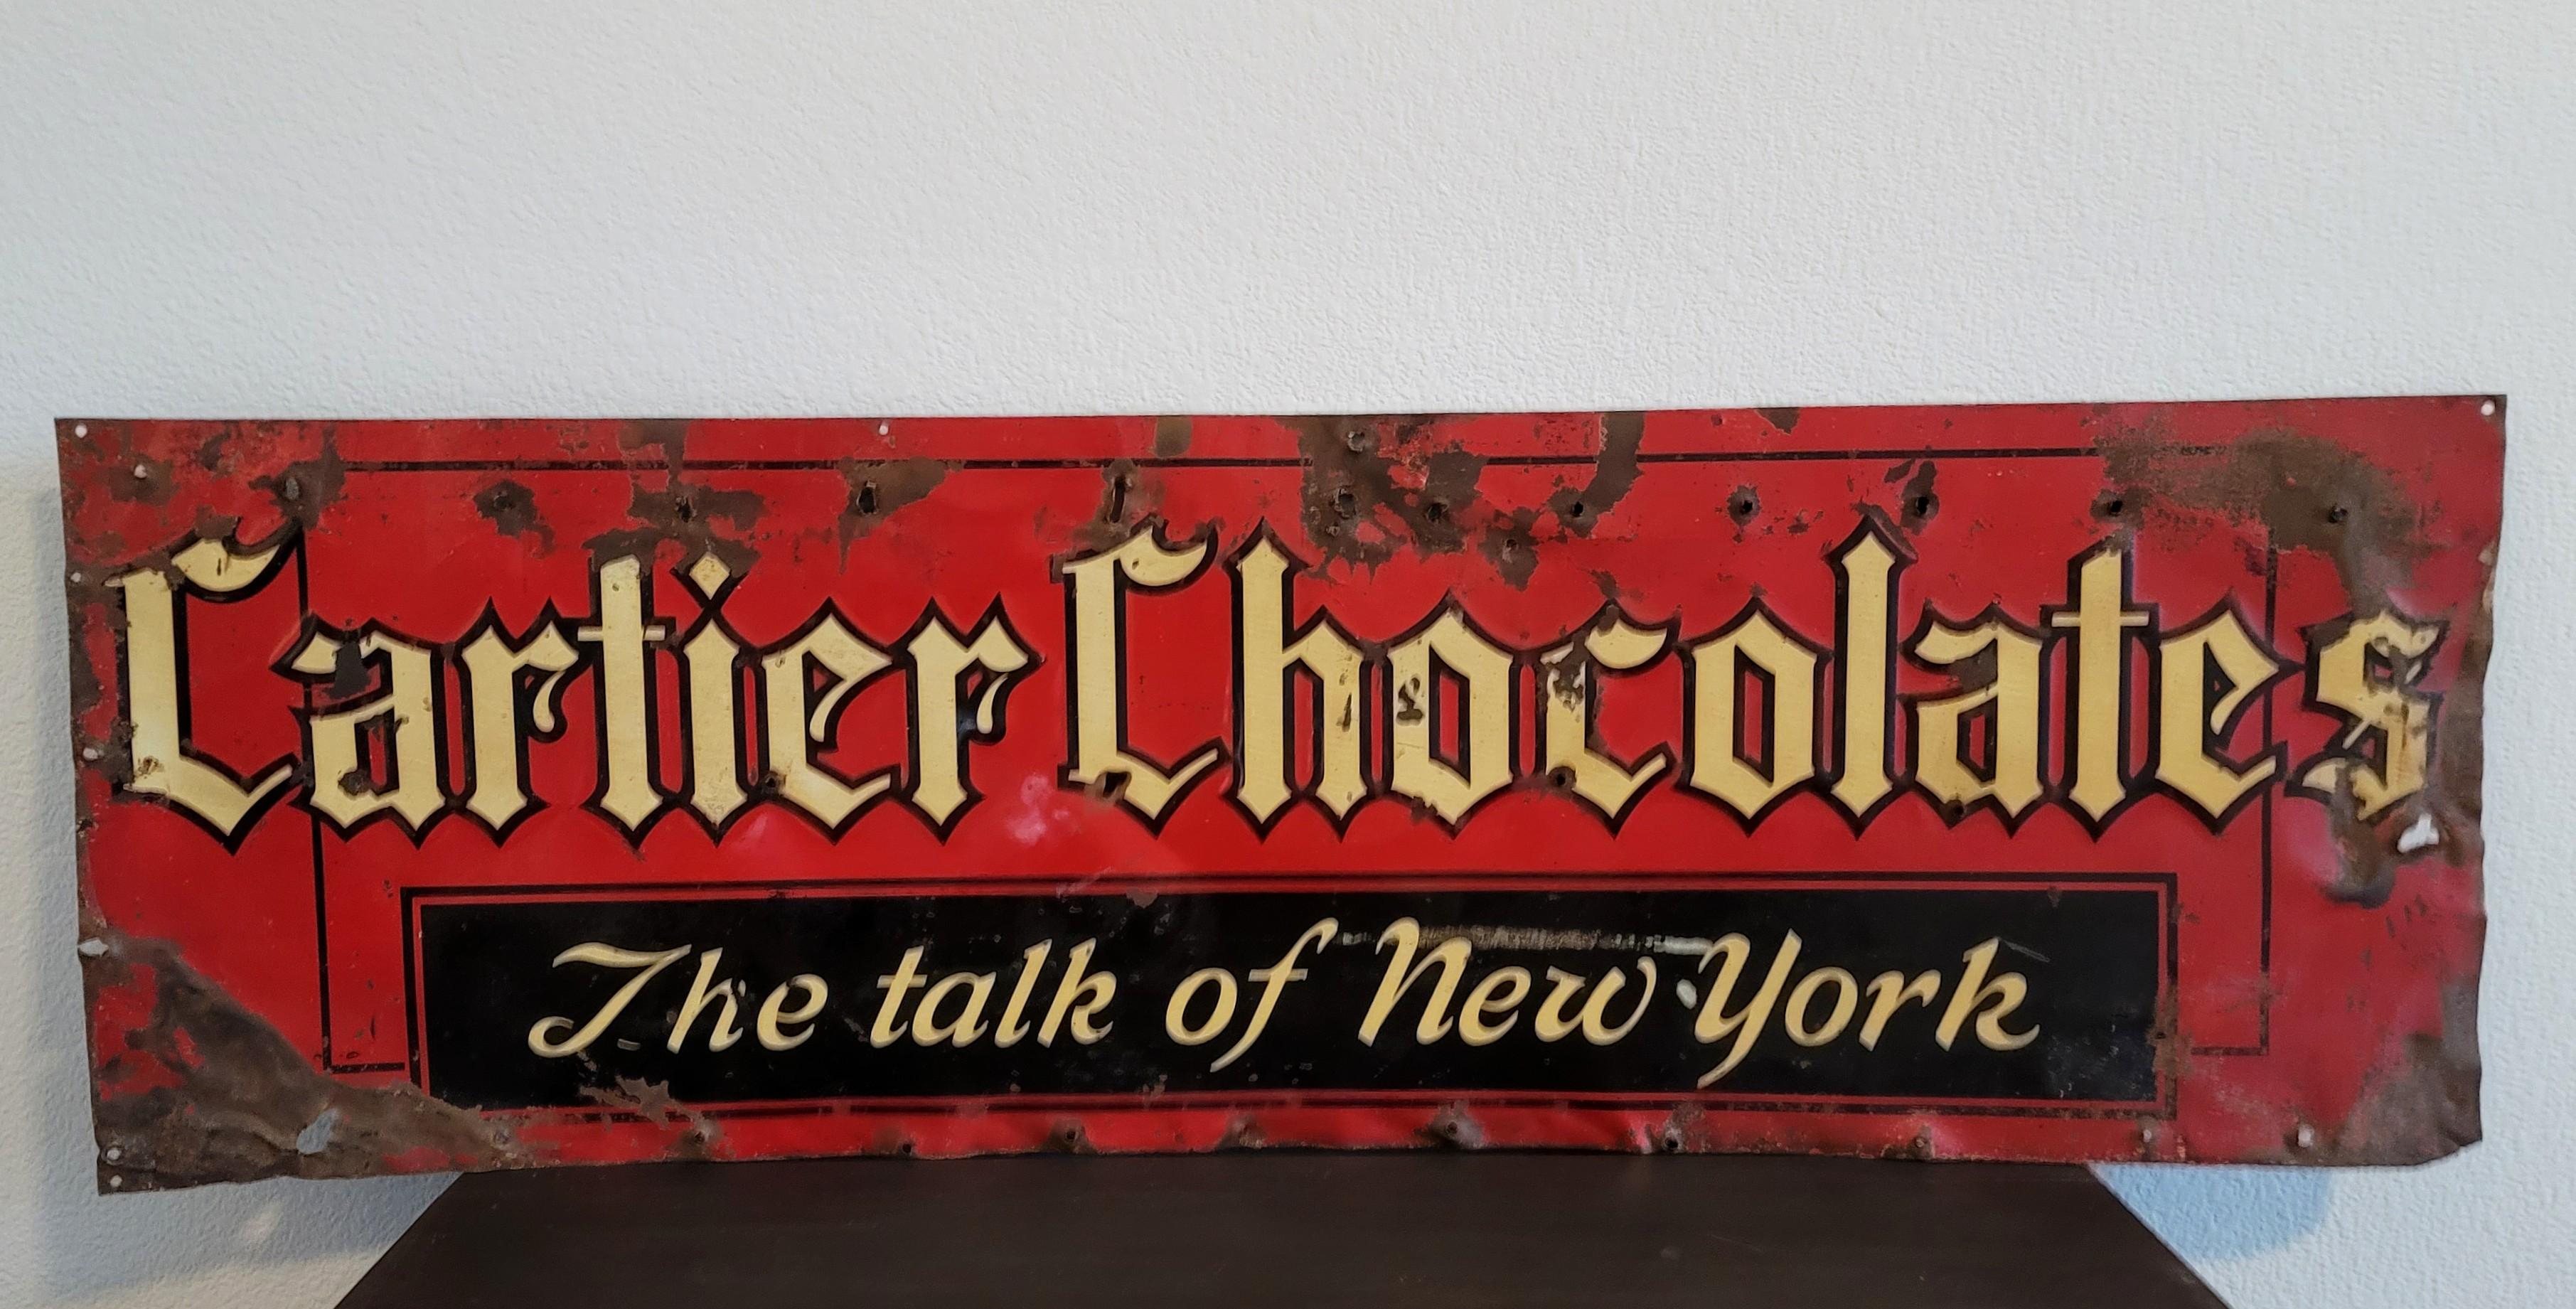 A scarce vintage Cartier Chocolates, The Talk of New York metal sign. 

Dating to the early/mid-20th century, the rare and important advertising sign once adorning the iconic Parisian luxury boutiques Fifth Avenue NYC Mansion flagship store.